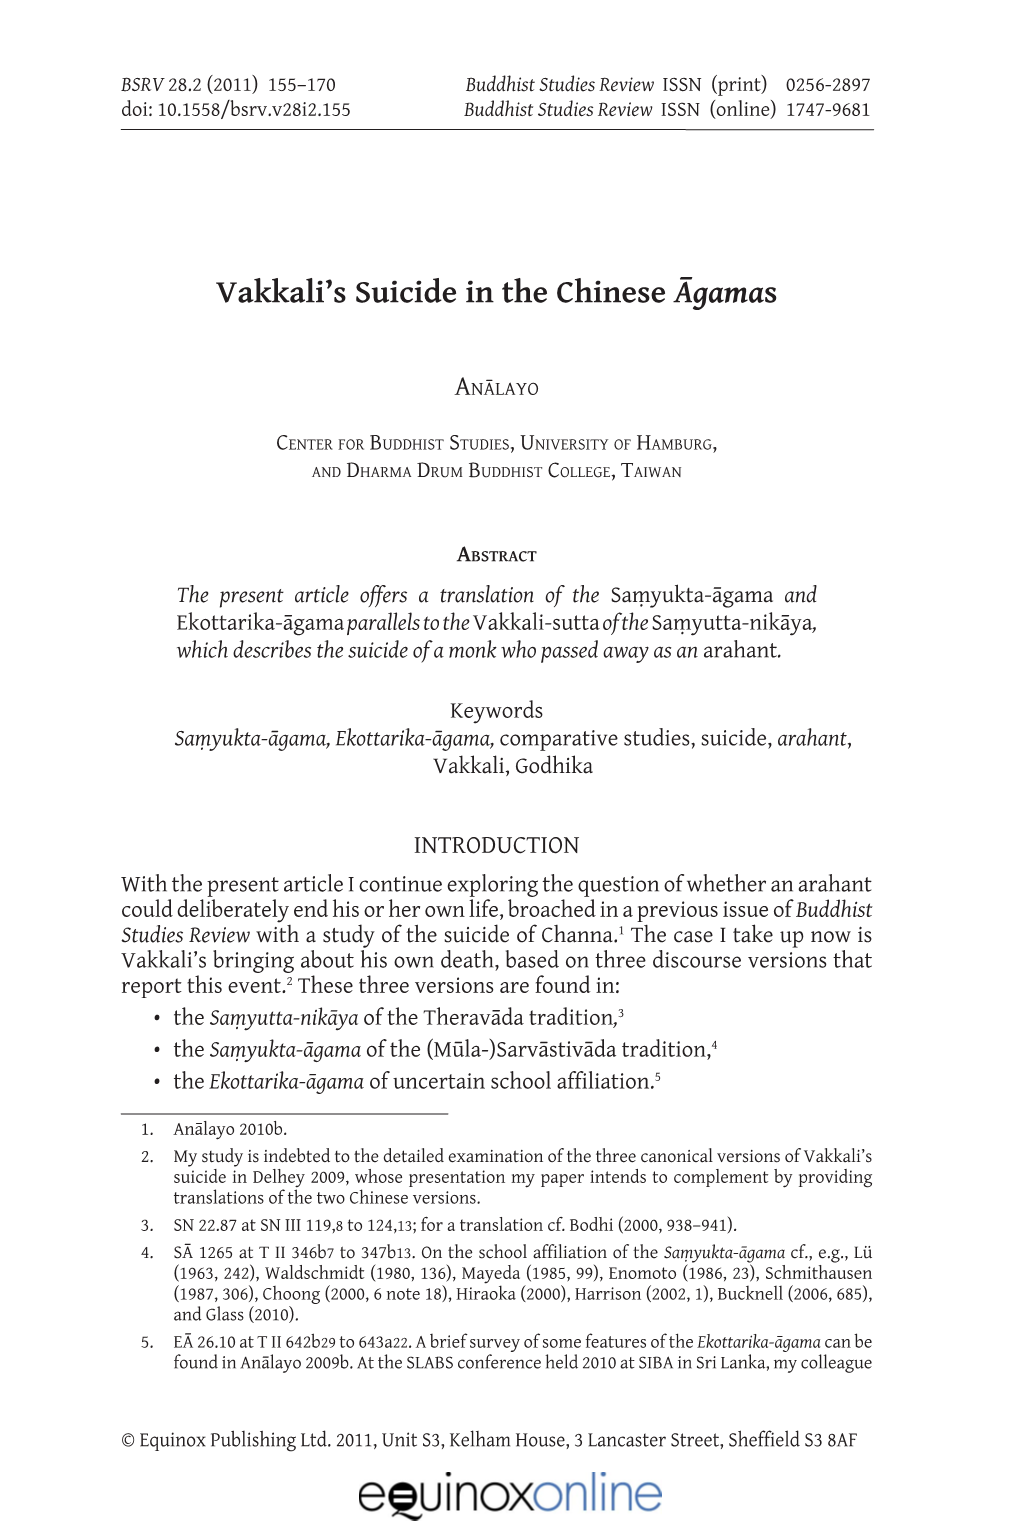 Vakkali's Suicide in the Chinese Āgamas